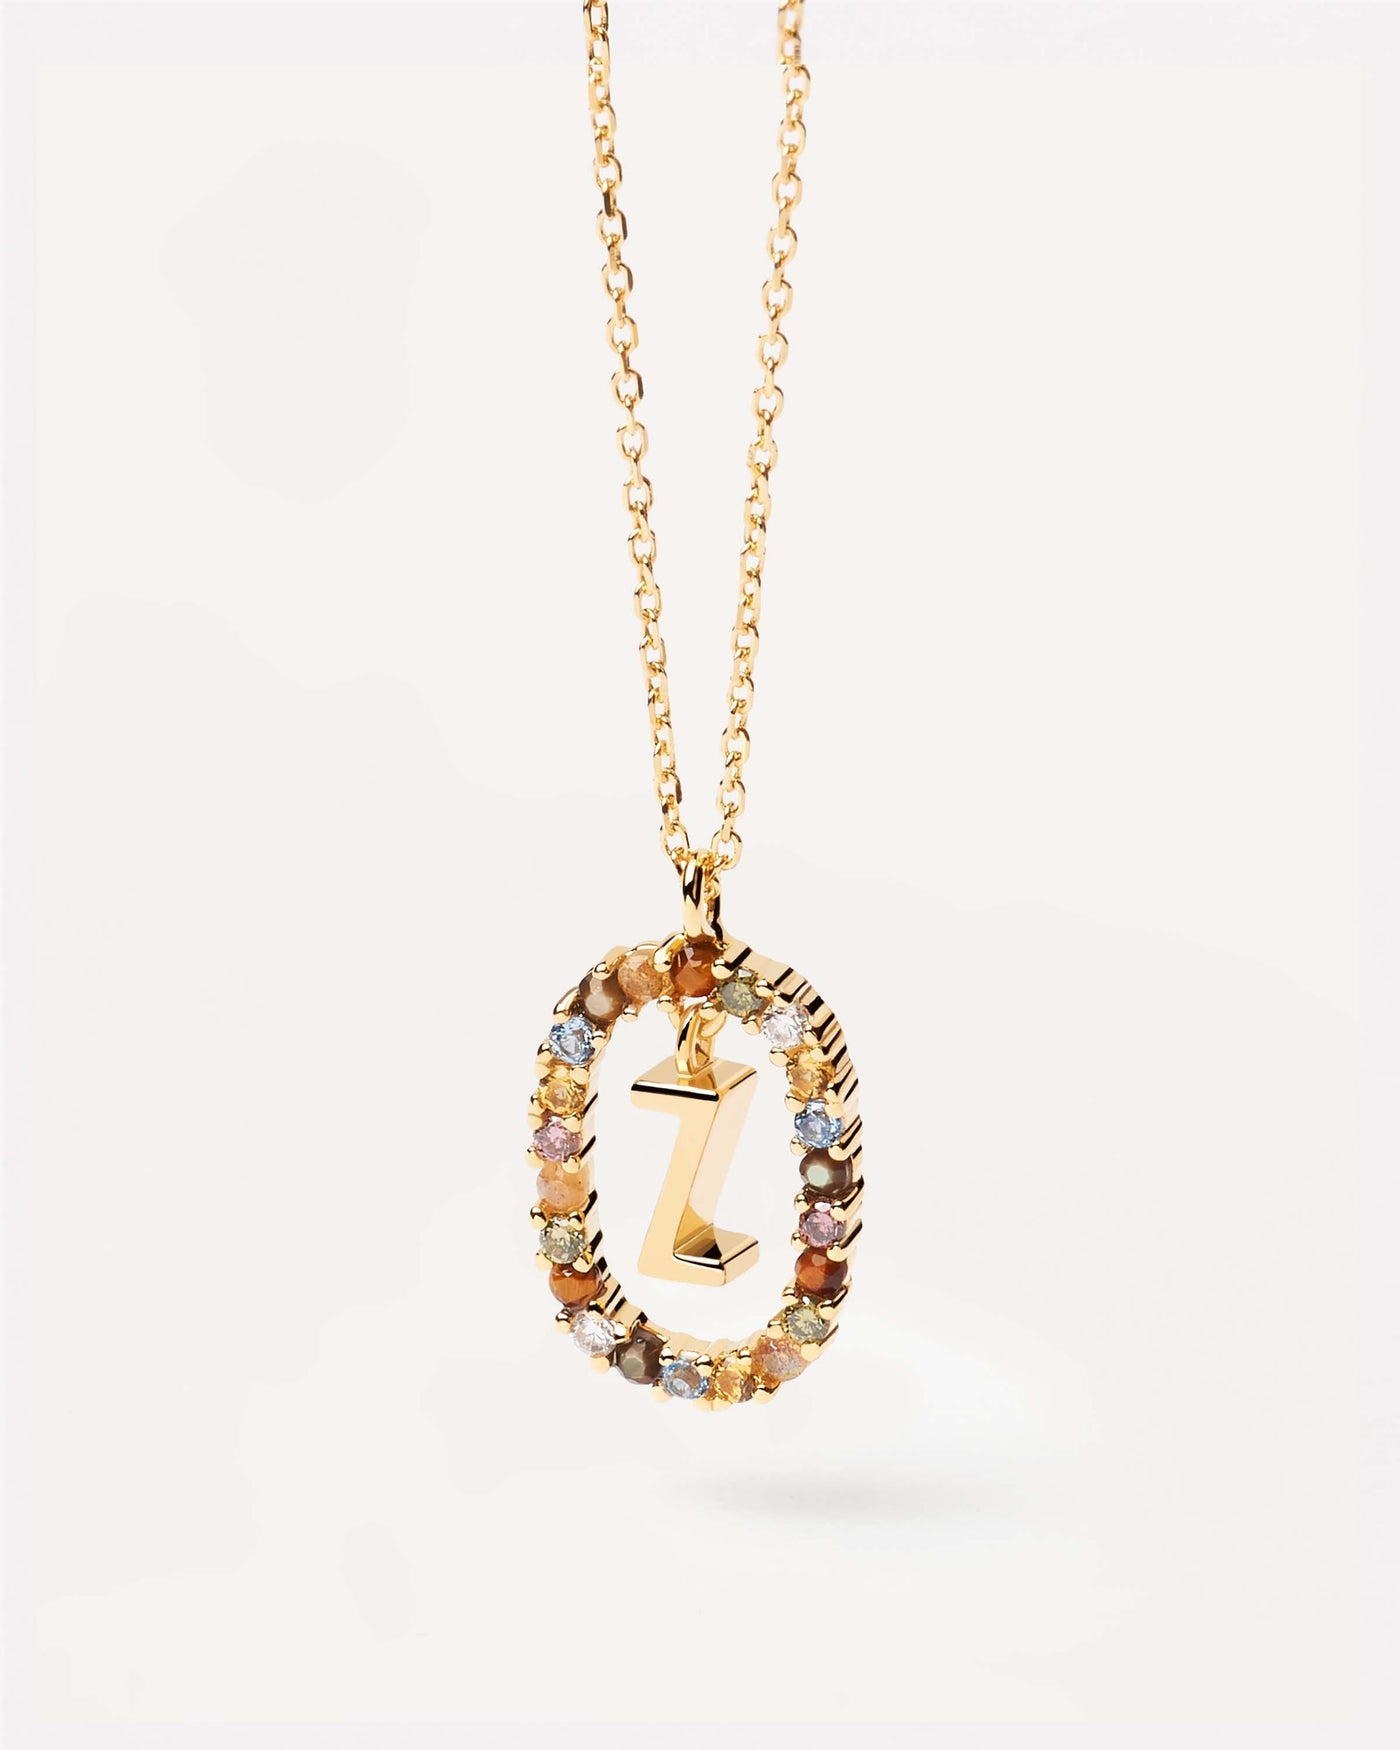 2023 Selection | Letter Z necklace. Initial Z necklace in gold-plated silver, circled by colorful gemstones. Get the latest arrival from PDPAOLA. Place your order safely and get this Best Seller. Free Shipping.